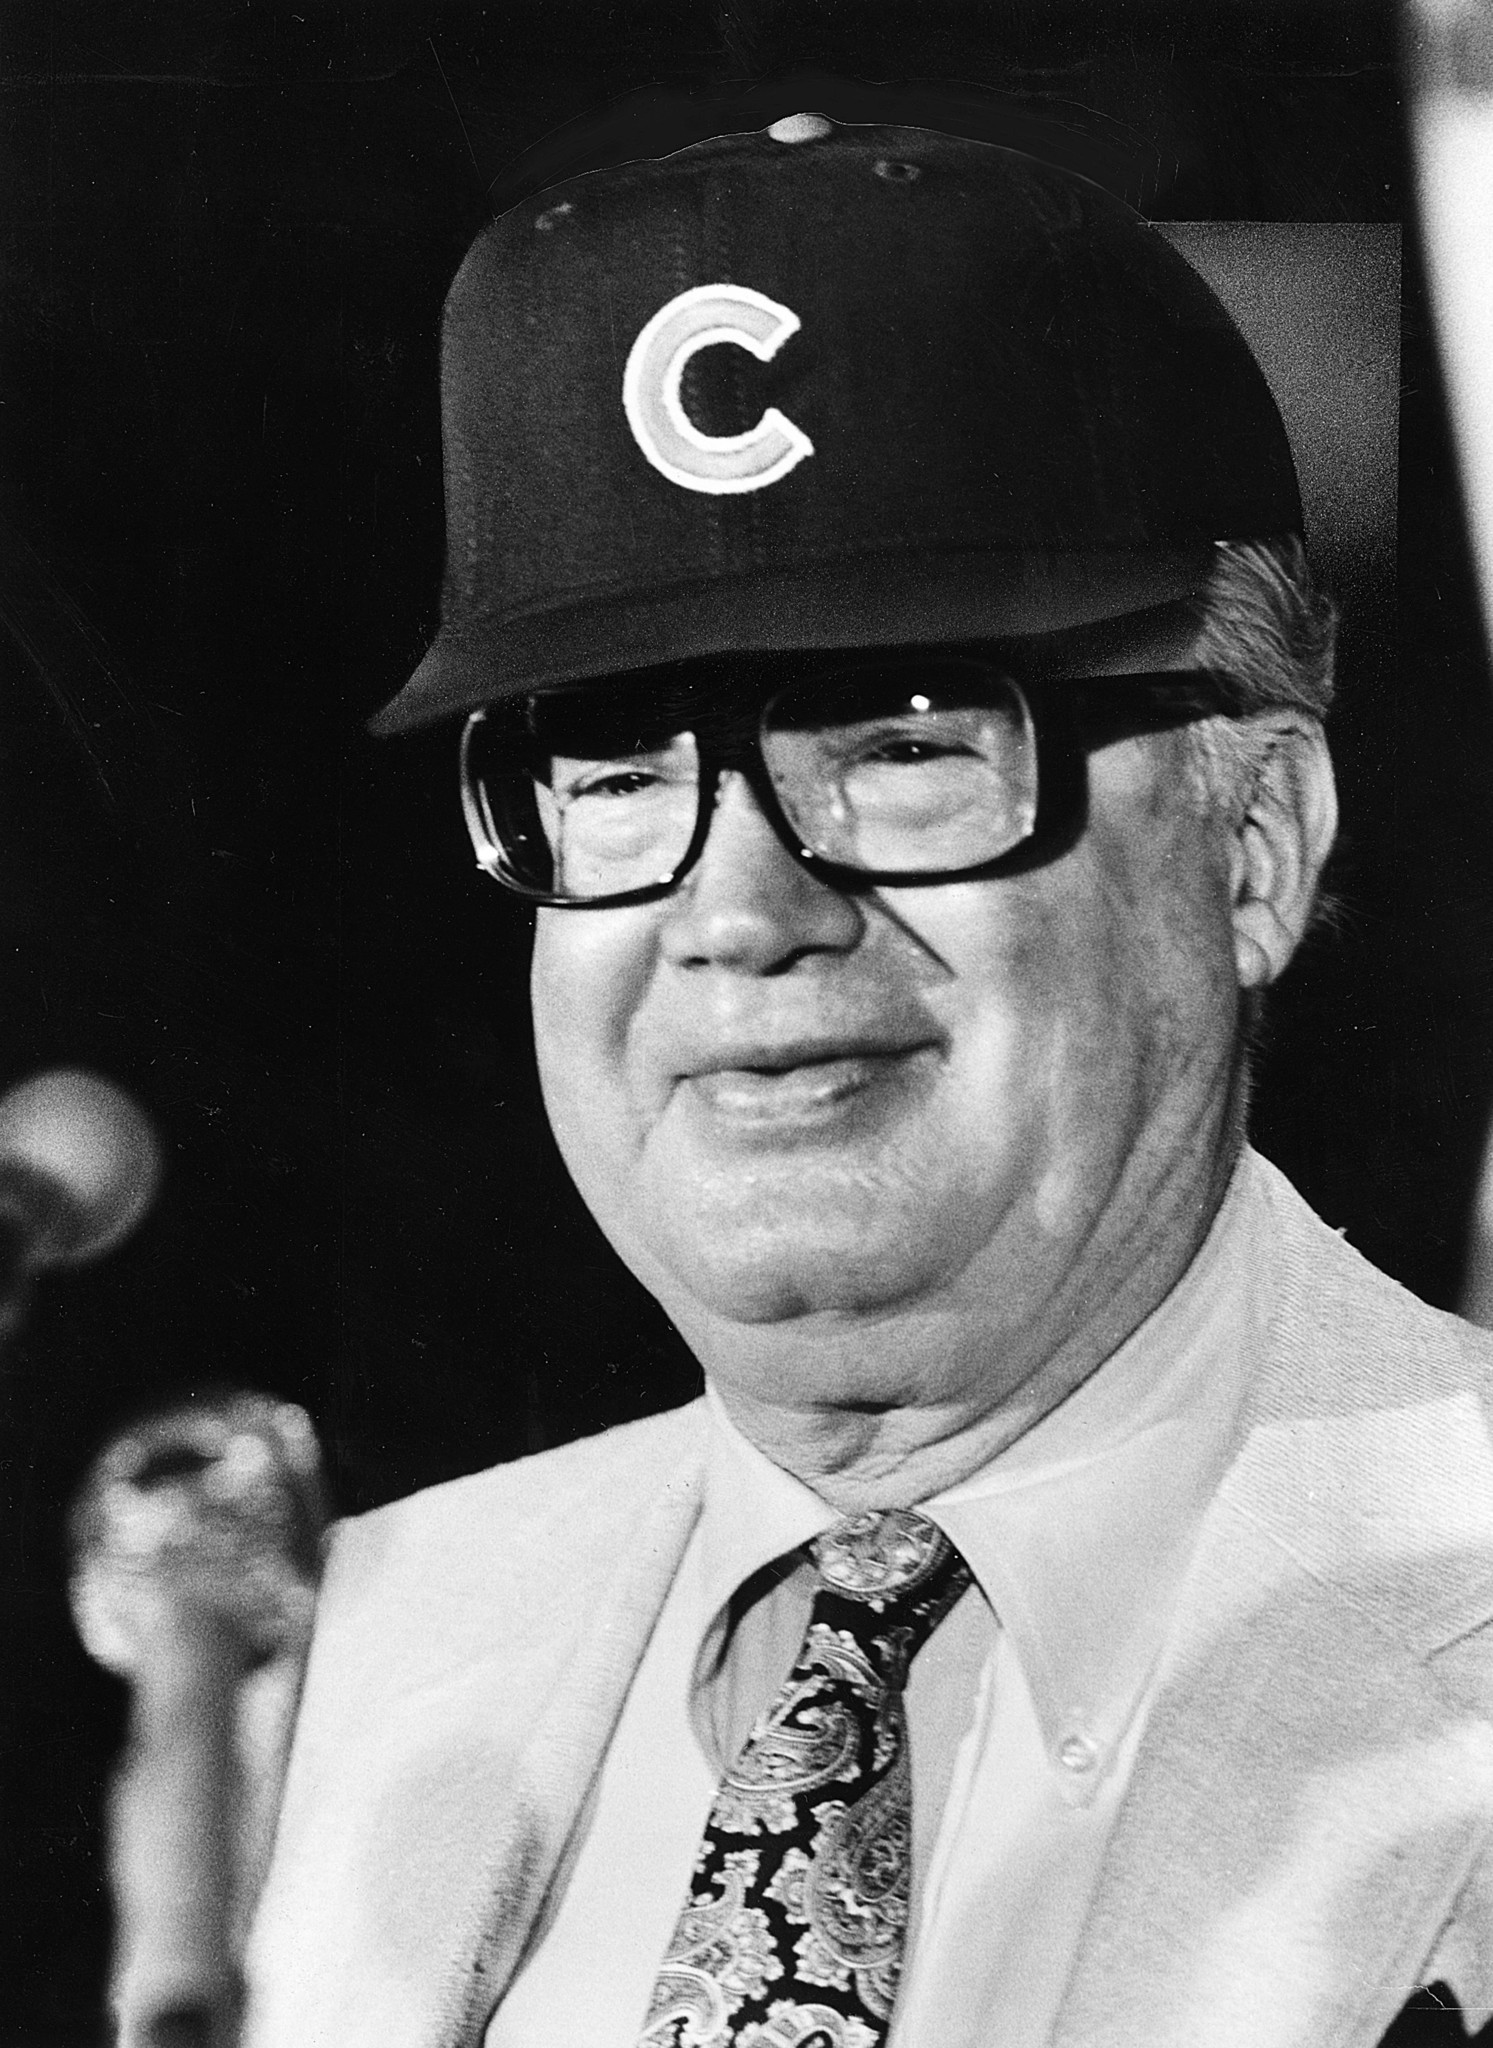 Baseball In Pics on X: Harry Caray broadcasting from the